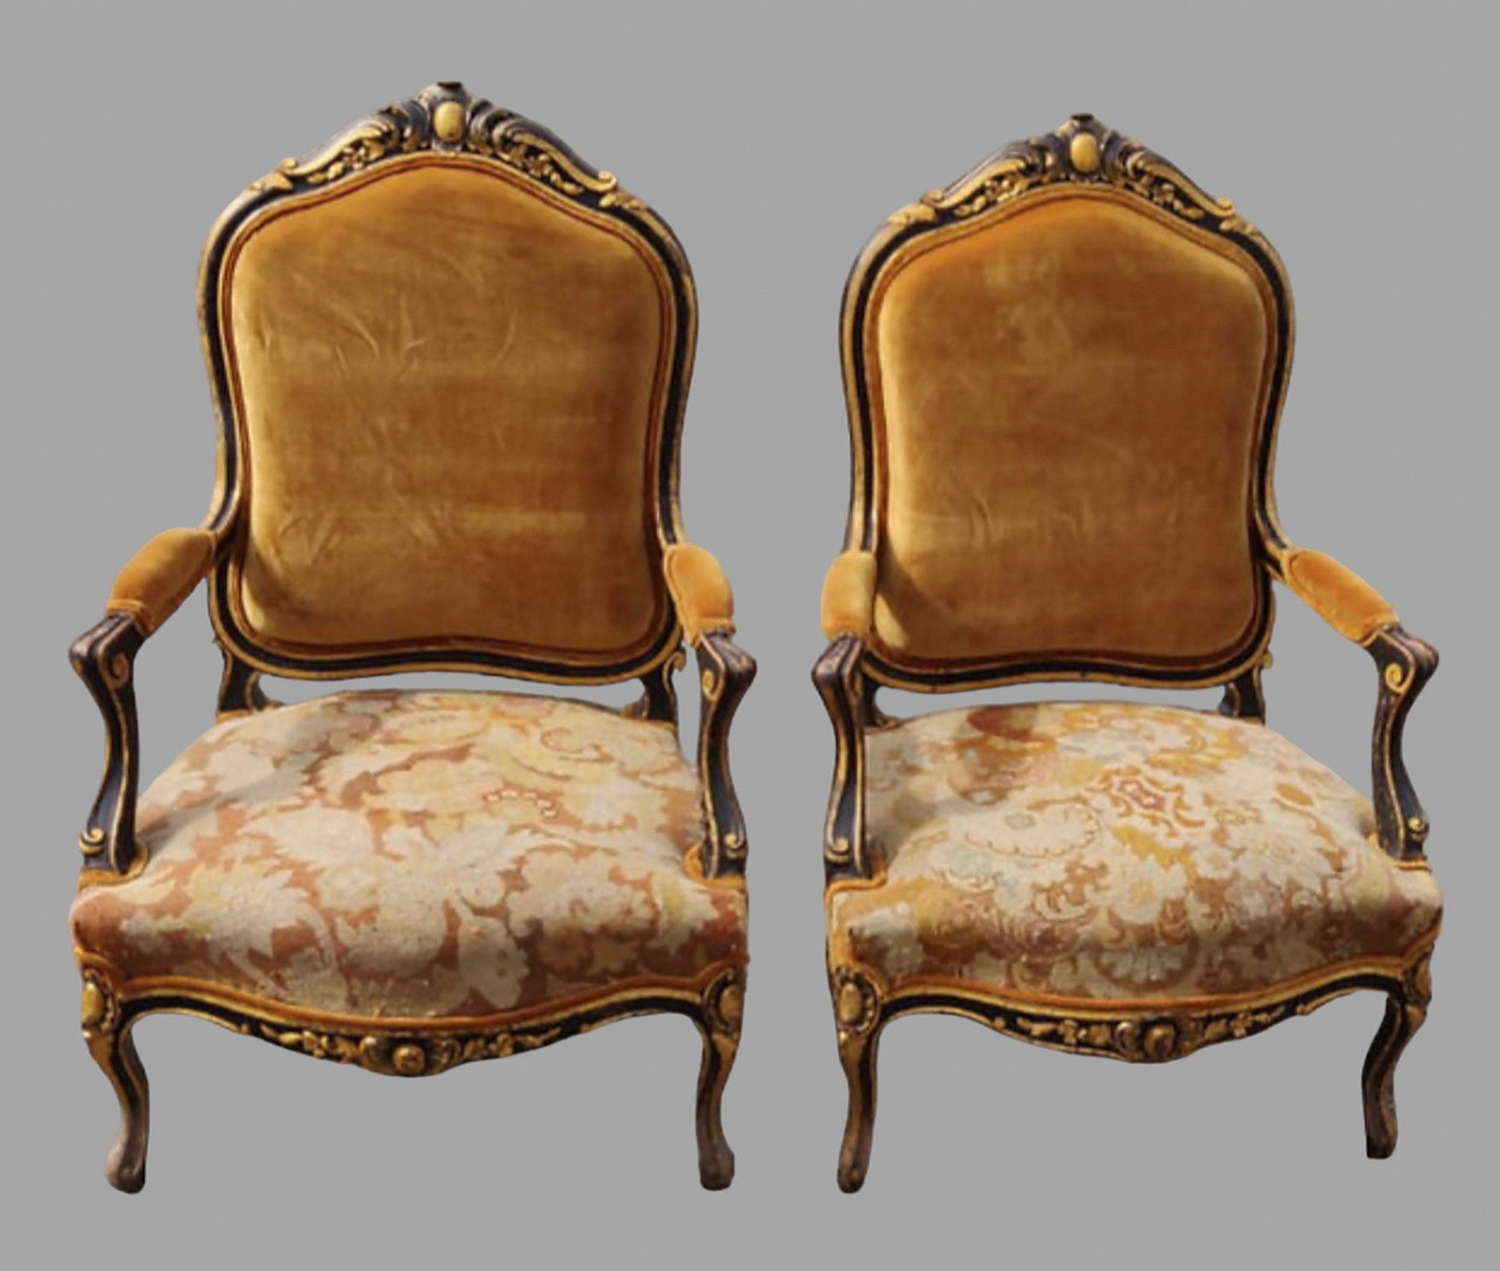 A Pair of Second Empire Fauteuil Armchairs